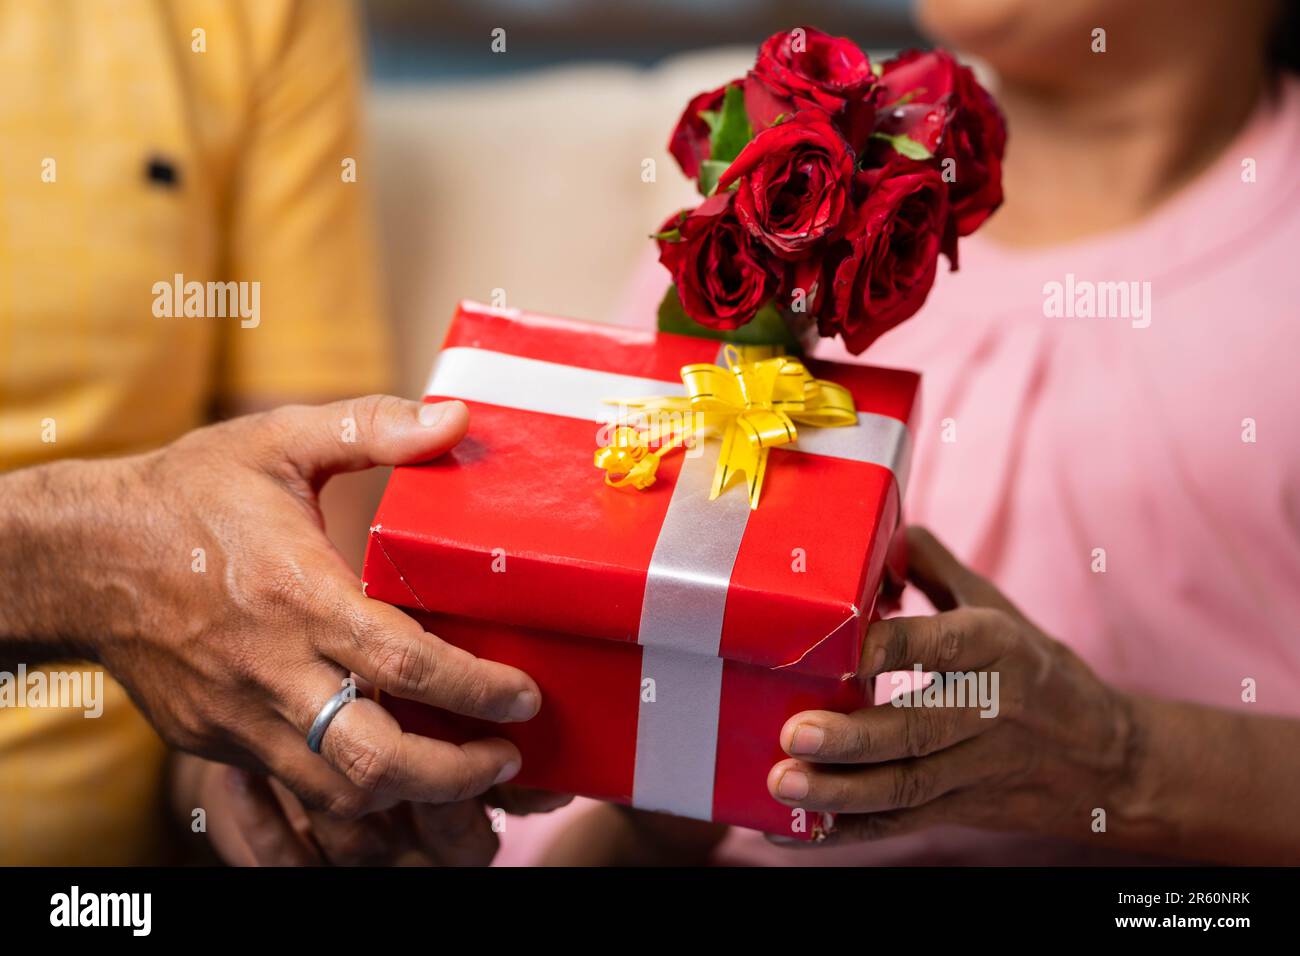 Close up shot of son hands giving gift with red roses to mother at home - concept of mother's day, family relationship and love moment. Stock Photo